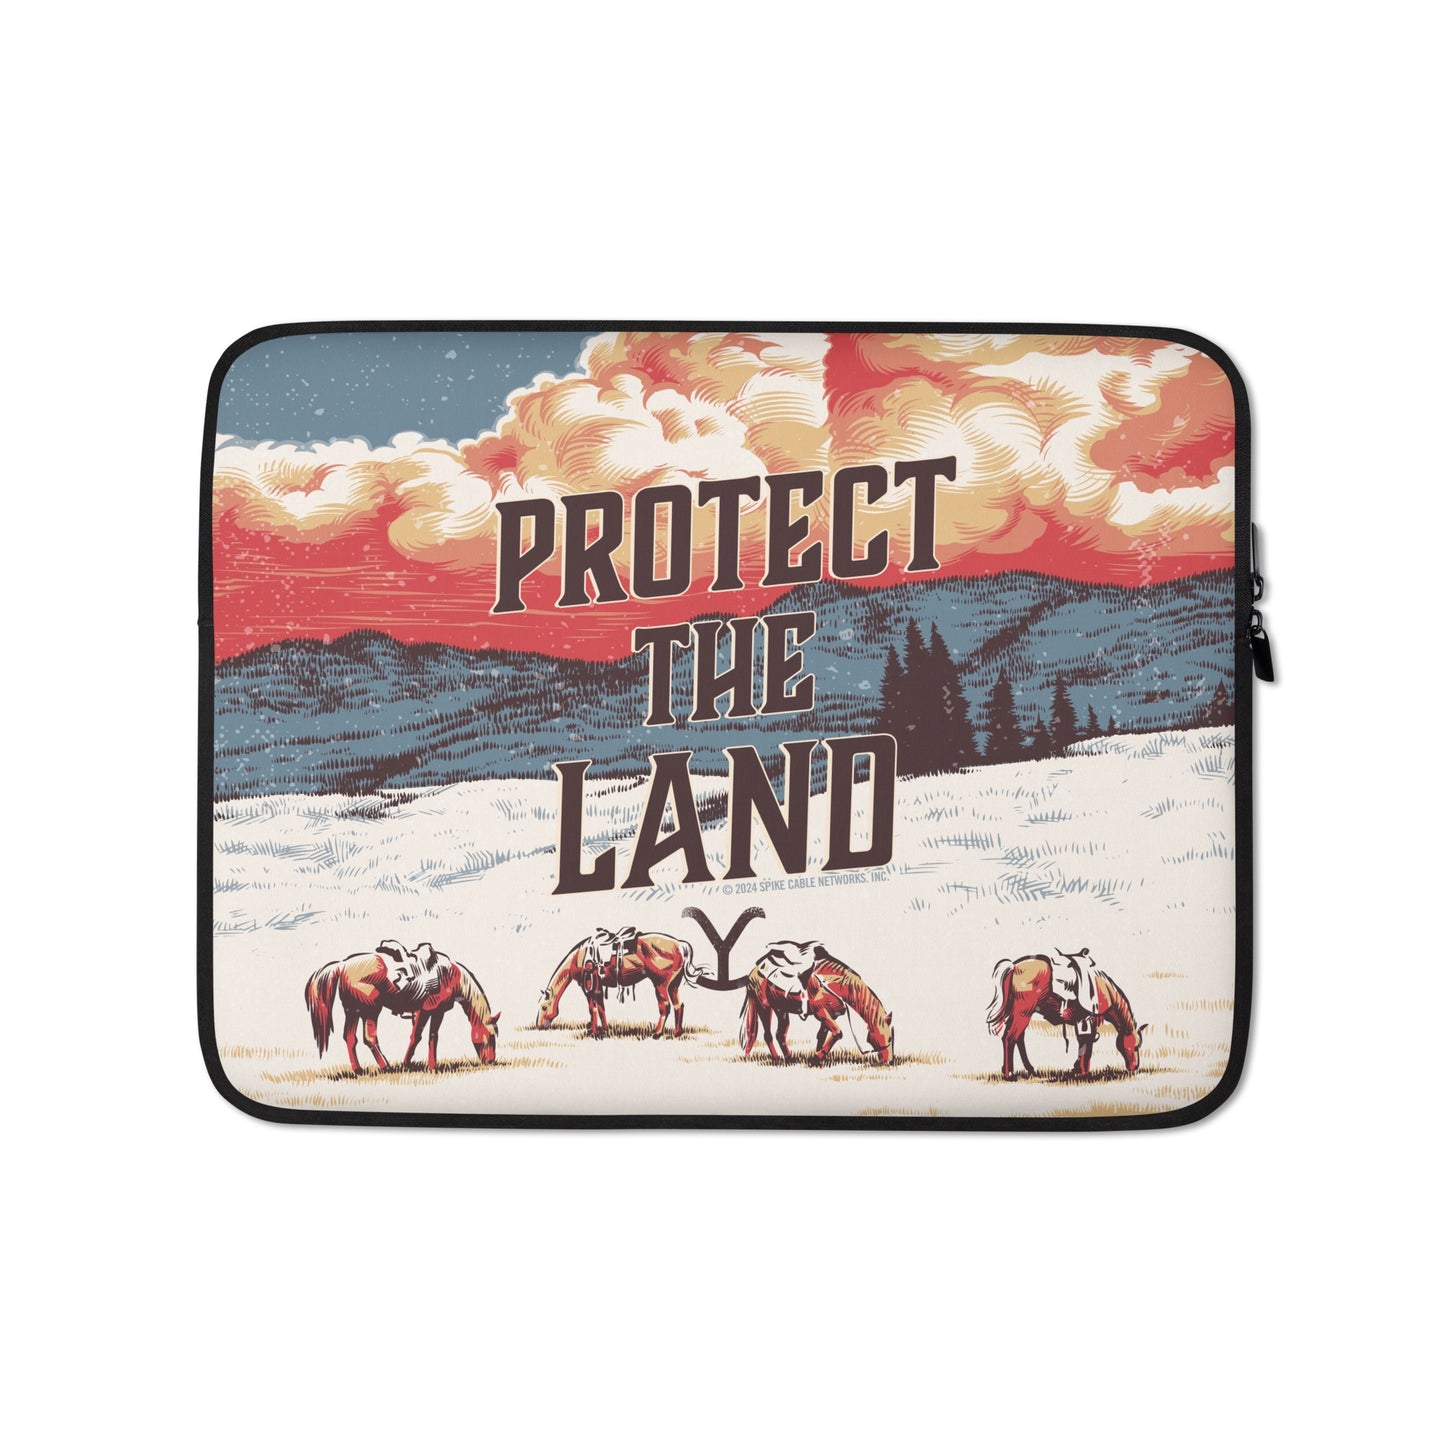 Yellowstone Protect The Land Laptop Sleeve